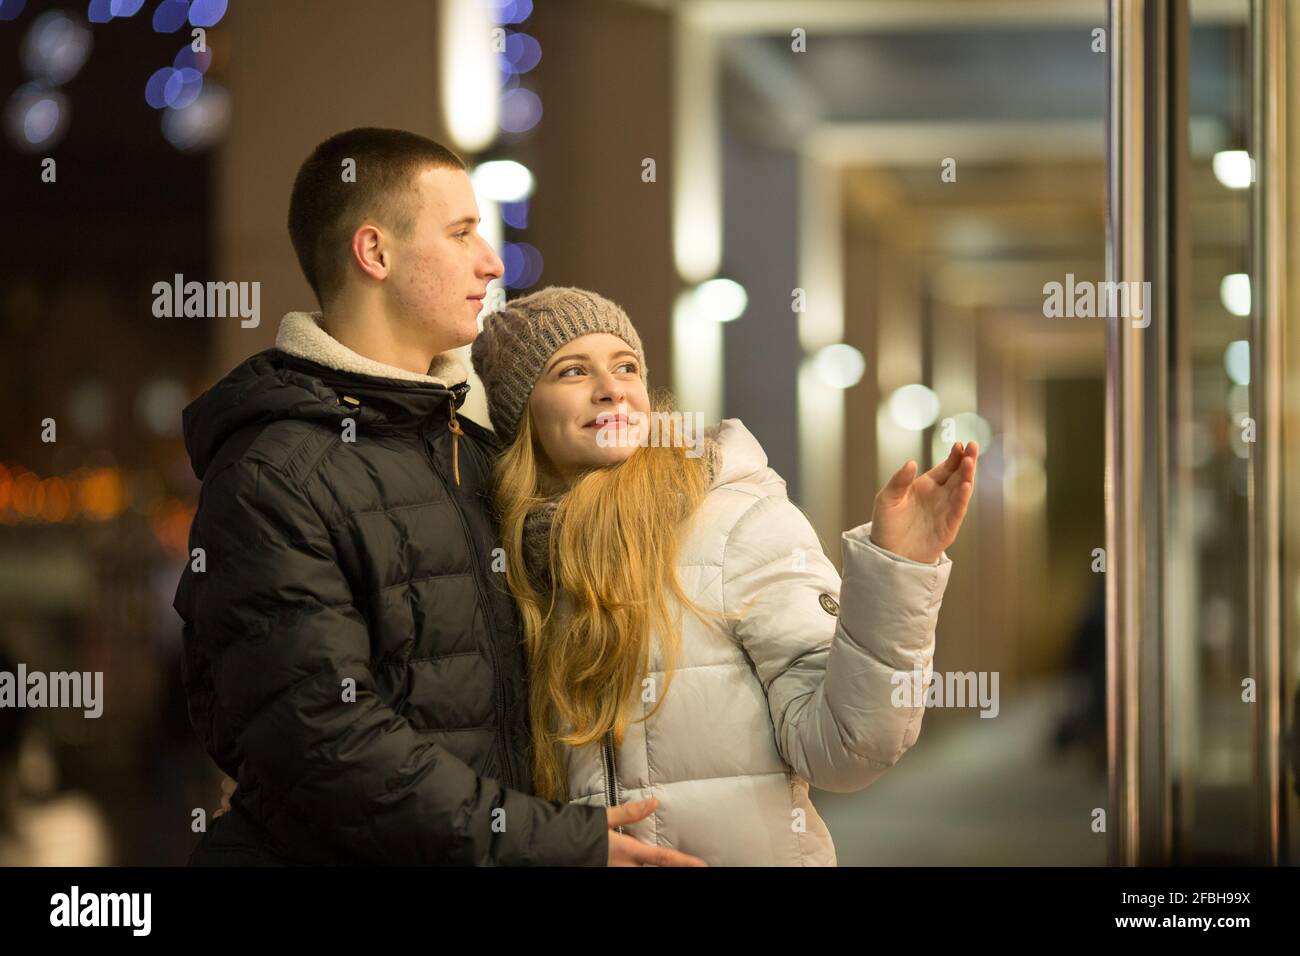 Dnepropetrovsk, Ukraine - 09.12.2016: A couple of young people in front of an expensive store window. Stock Photo